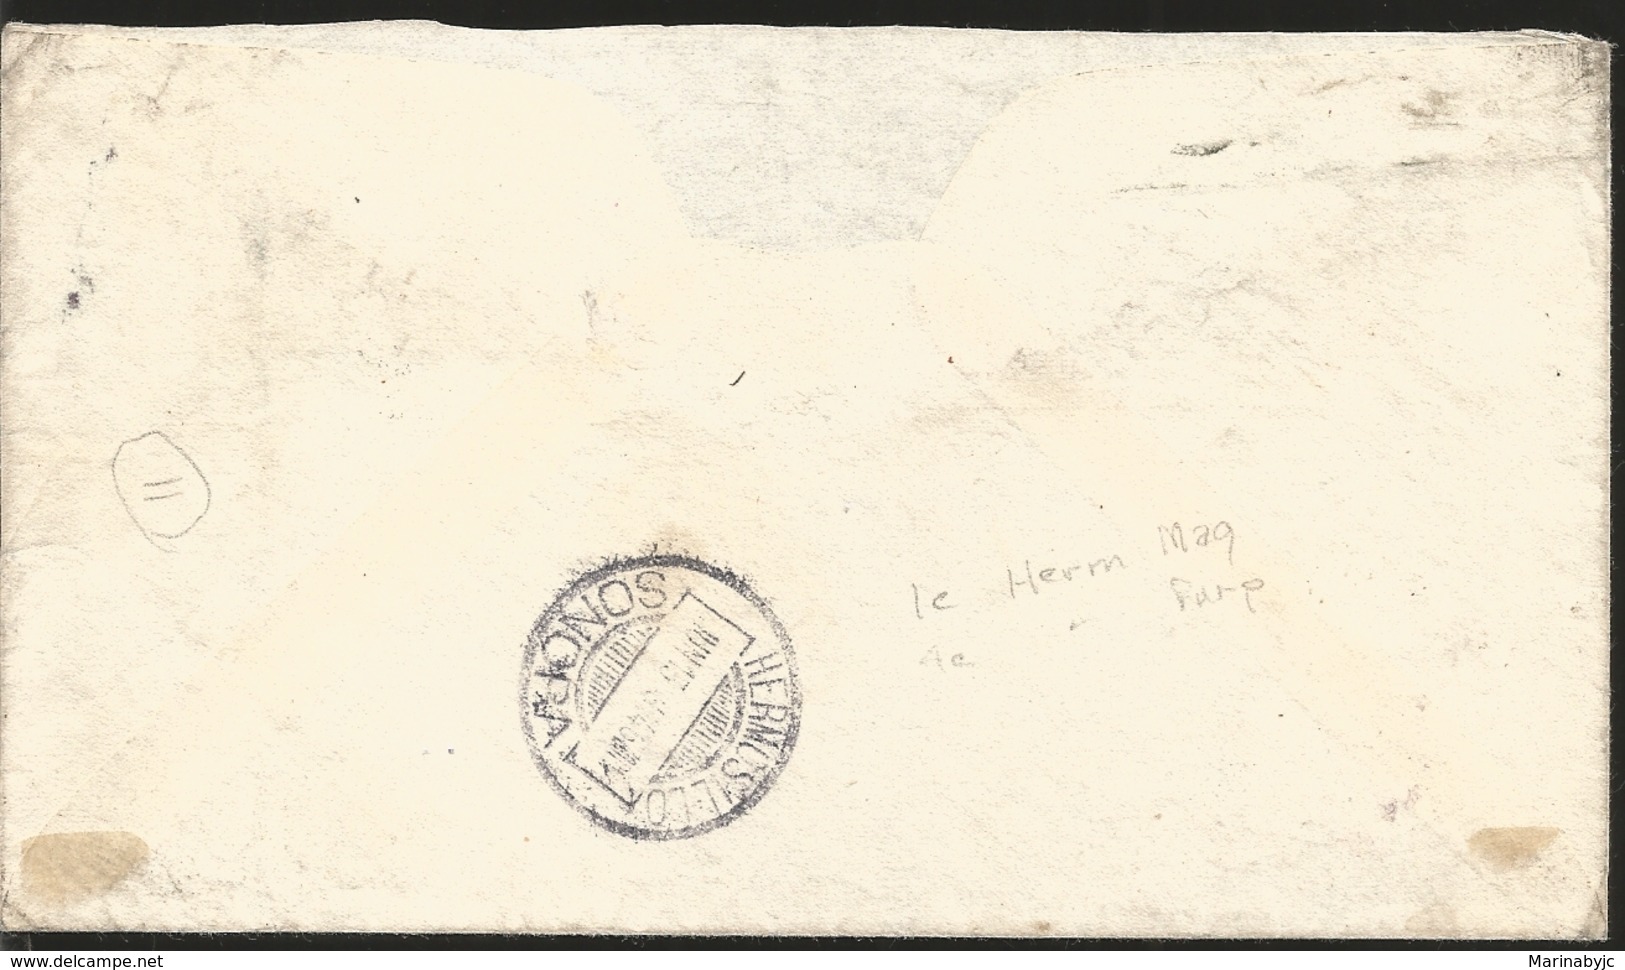 J) 1914 MEXICO, LETTER DISPATCHED TO HERMOSILLO FROM UNKNOWN TOWN IN SONORA ON 12 JUNE 1914, EARLY USAGE OF MAGNETA PRIN - Mexico